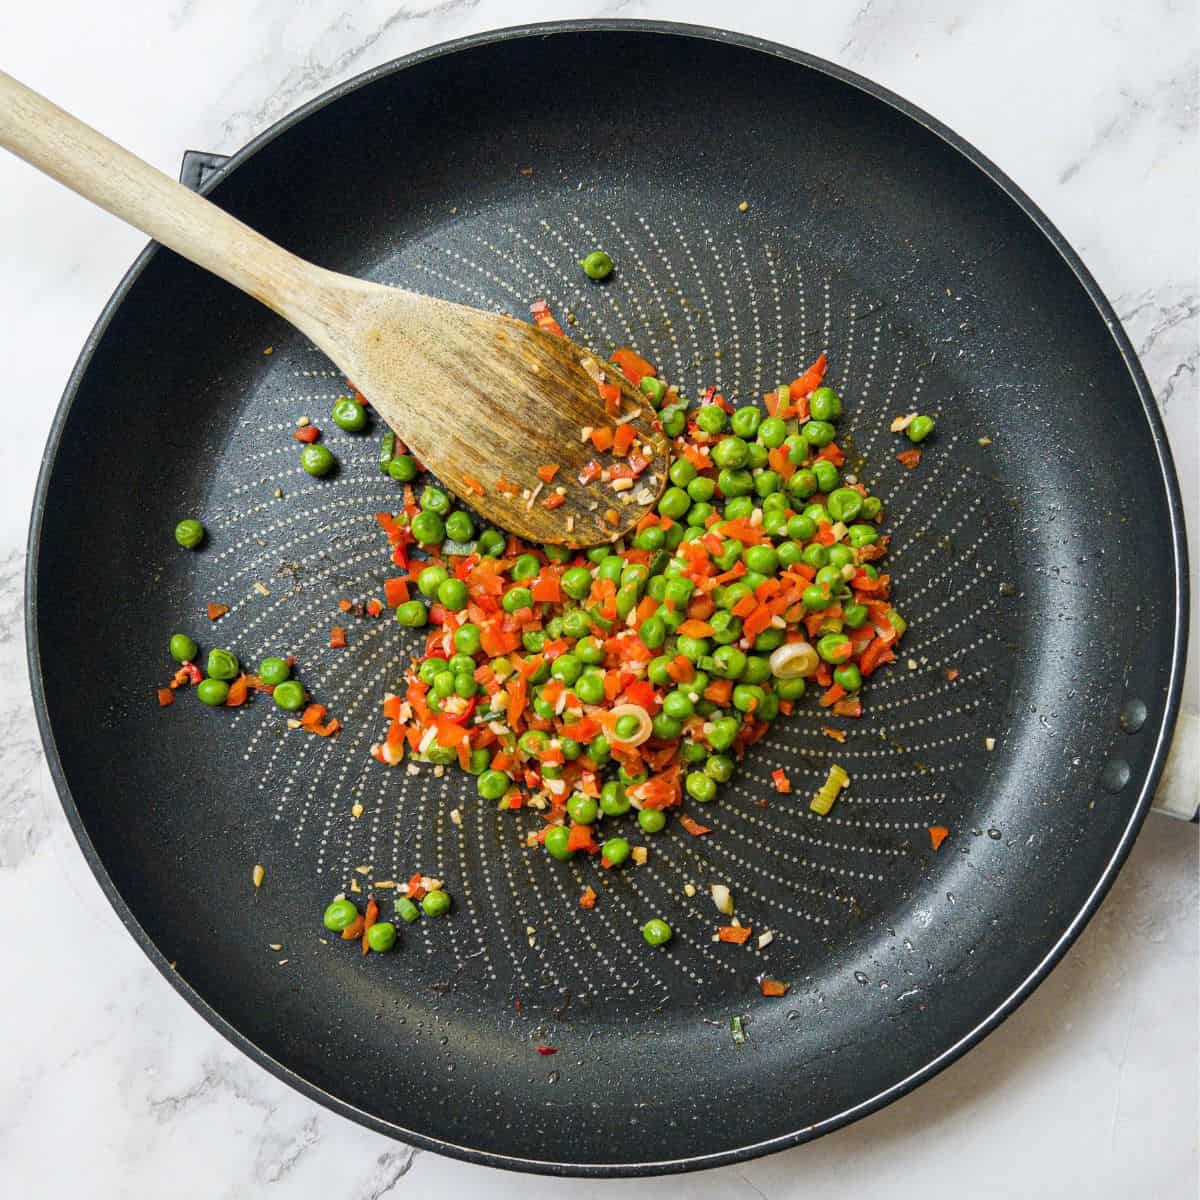 Peas and red peppers in a frying pan with a wooden spoon.